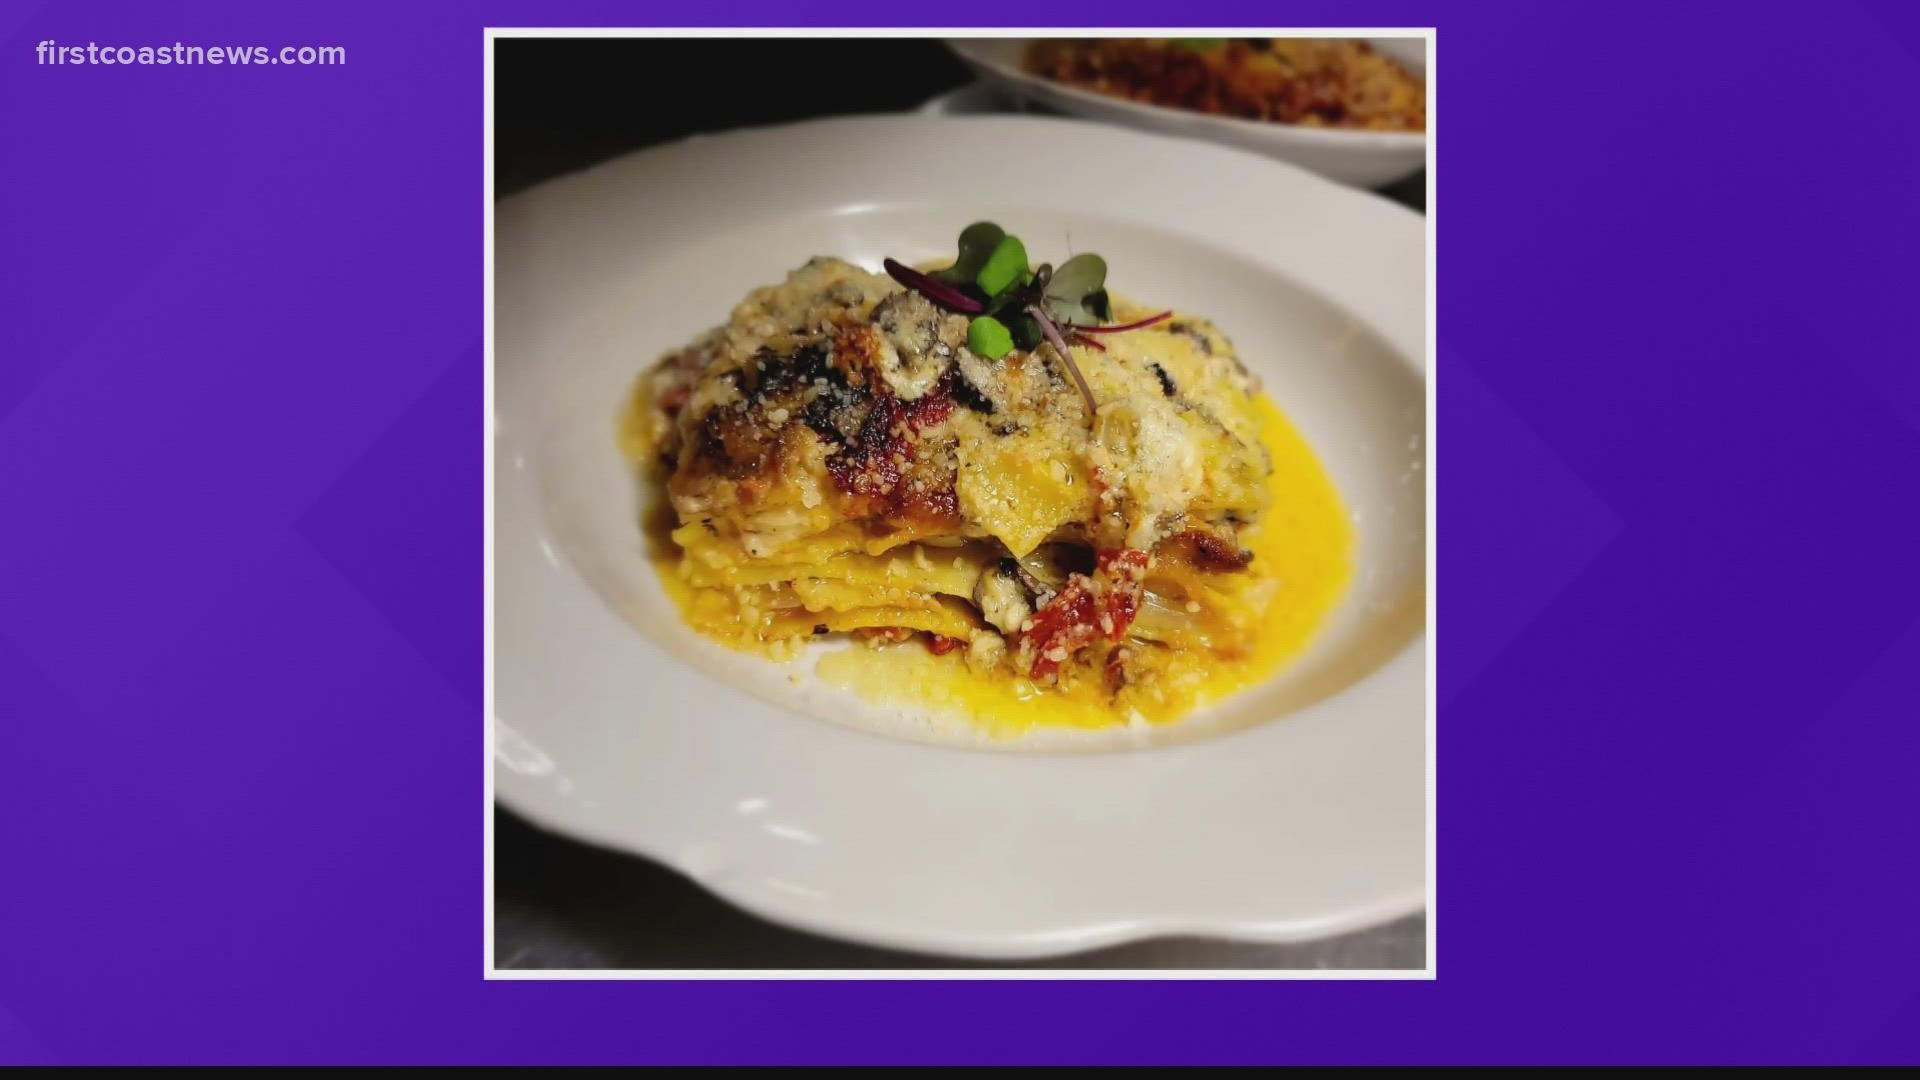 Menu offerings range from gourmet pasta dishes, fresh seafood, and Italian desserts such as limoncello mascarpone cake.